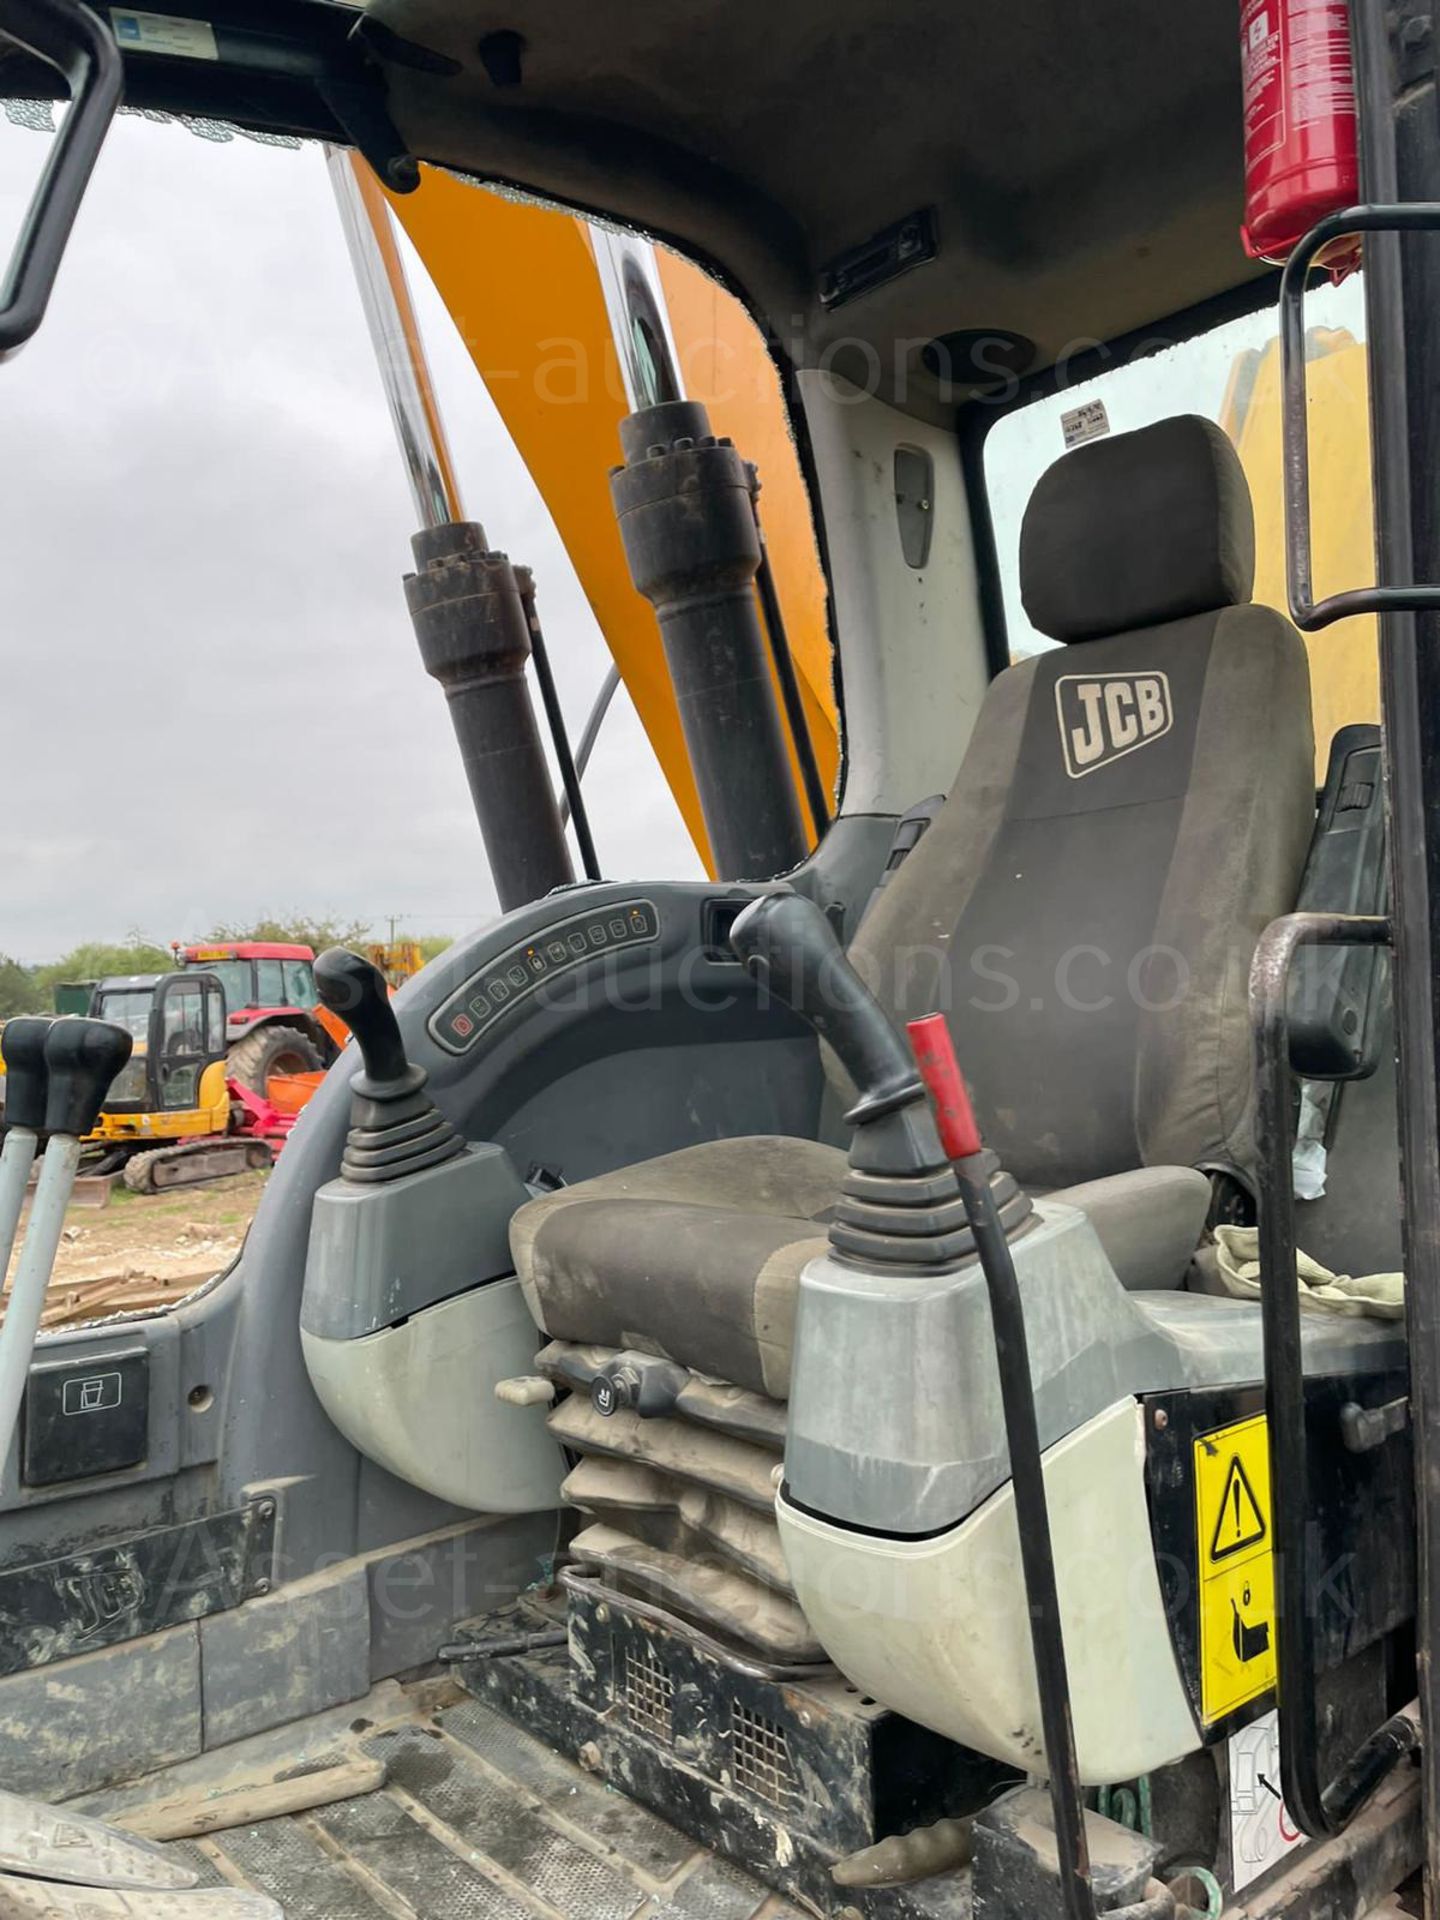 2009 JCB JS160LC 16 TON STEEL TRACKED EXCAVATOR, RUNS DRIVES AND WORKS WELL, HIGH RISING CAB - Image 14 of 14